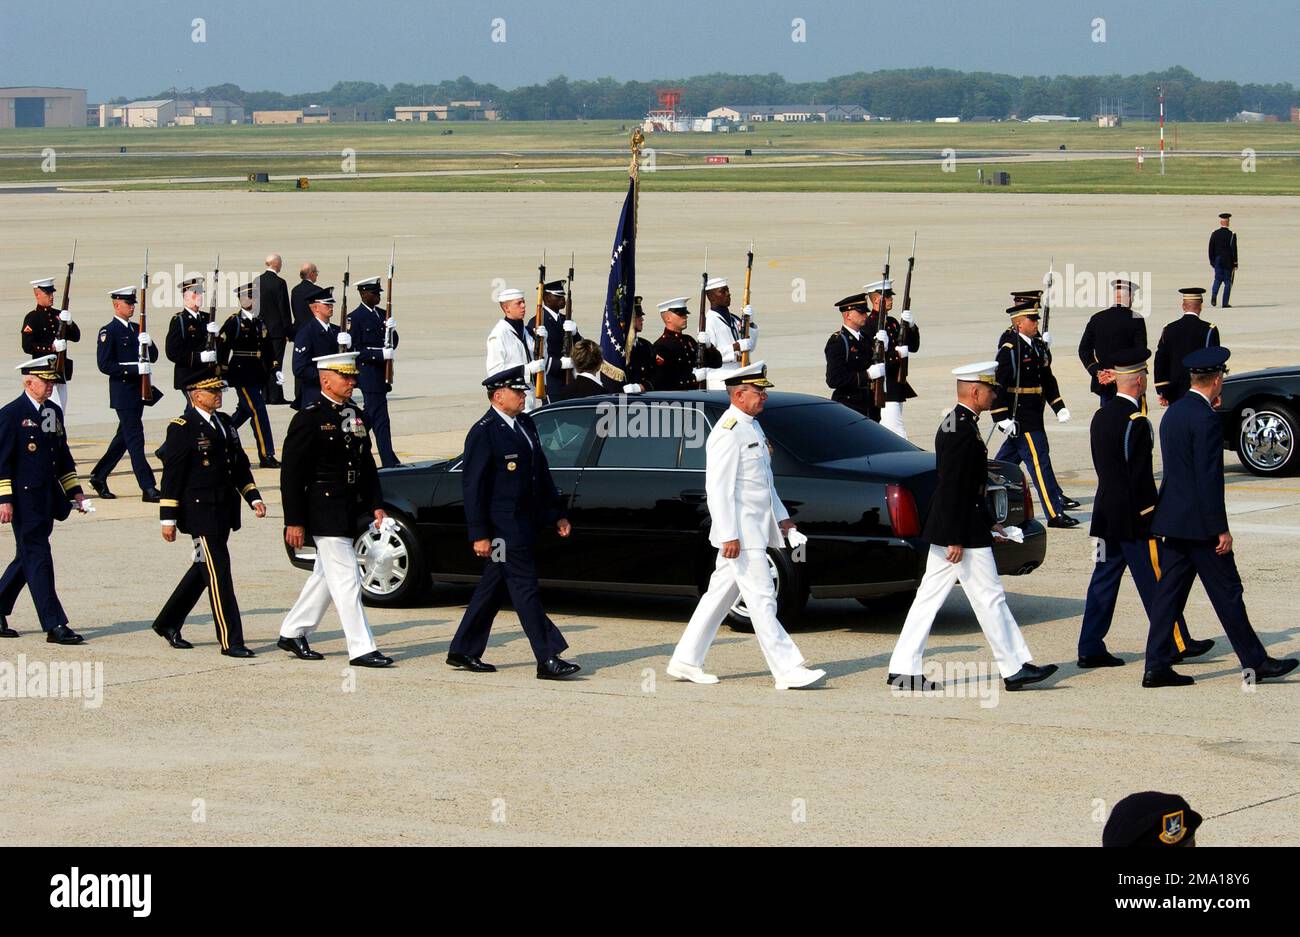 040609-M-7280S-201. [Complete] Scene Caption: A member of the US Army 3rd Infantry Old Guard (foreground left), escorts Members of the Joint Chiefs-of-STAFF, as they prepare to render honors to Former US President Ronald Reagan, as his body arrives at Andrews Air Force Base (AFB), Maryland (MD). Pictured right-to-left, US Air Force General (GEN) Richard B. Myers, Chairman Joint CHIEF-of-STAFF (CJCS), followed in secession by US Marine Corps (UMSC) GEN Peter Pace, Vice-Chairman, Joint CHIEF-of-STAFF, US Navy (USN) Admiral (ADM) Vernon E. Clark, CHIEF of Naval Operations (CNO), US Air Force (USA Stock Photo